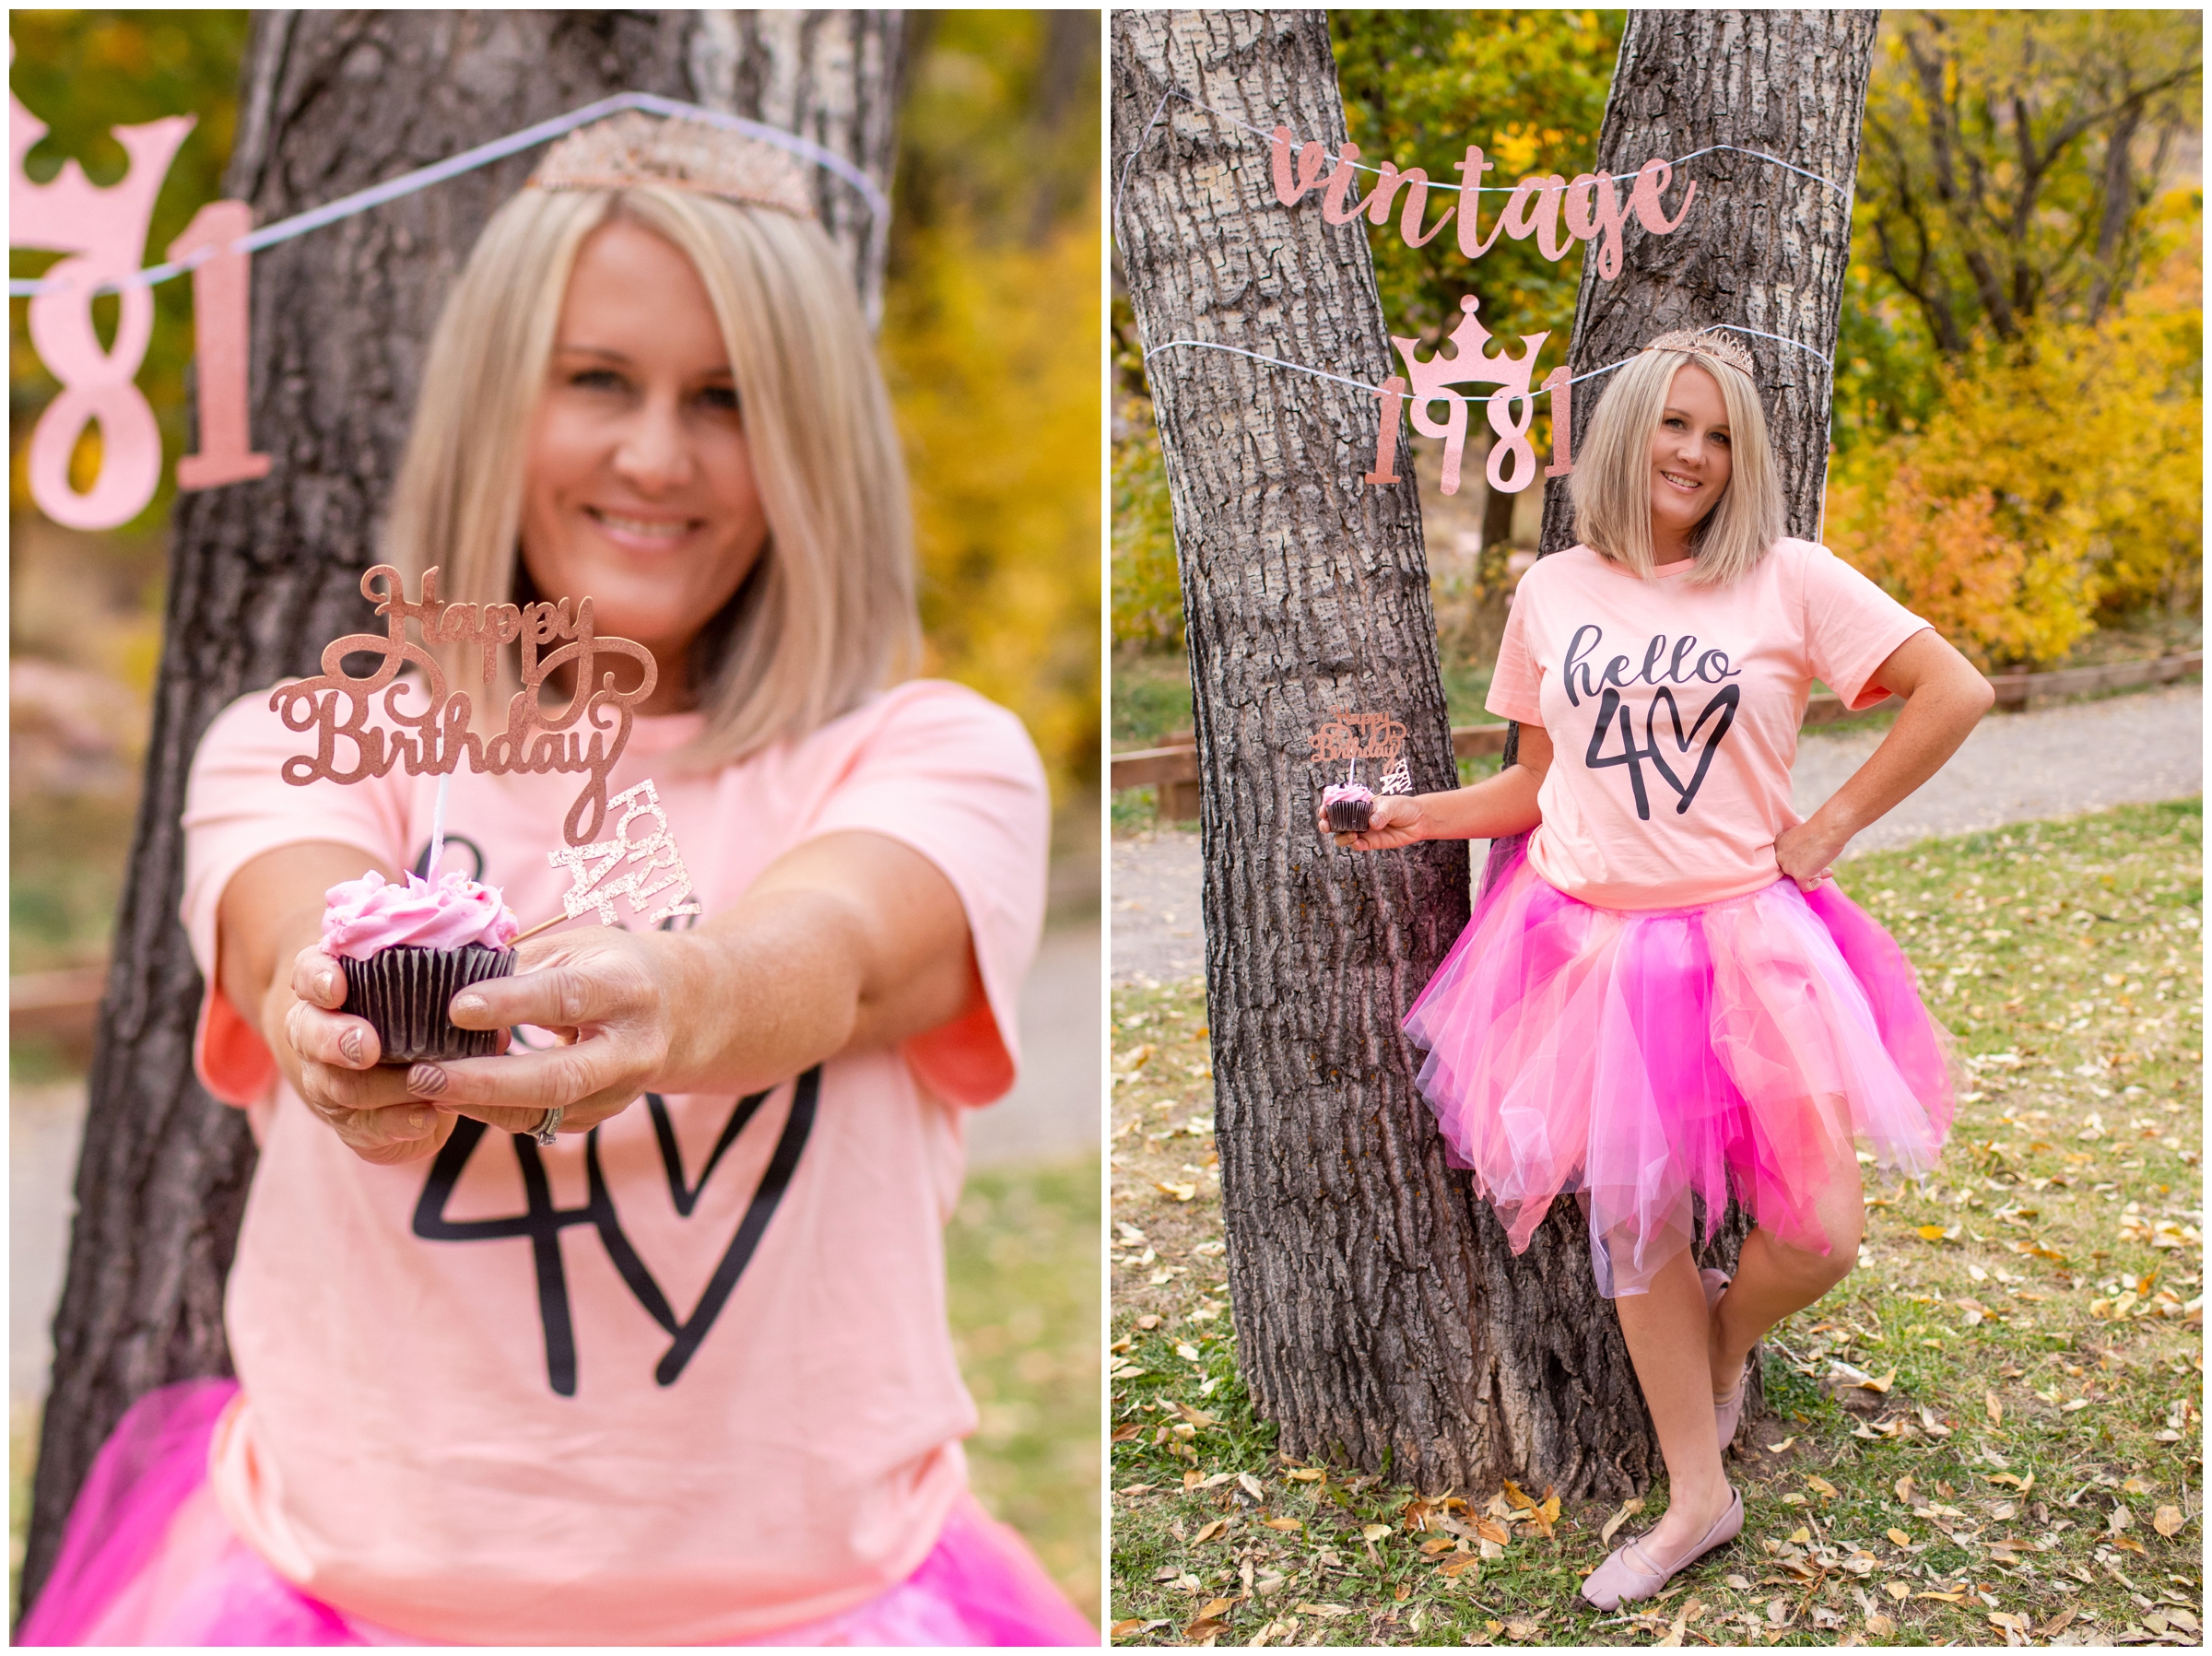 woman in tutu holding cupcake during 40th birthday photoshoot in Lyons Colorado